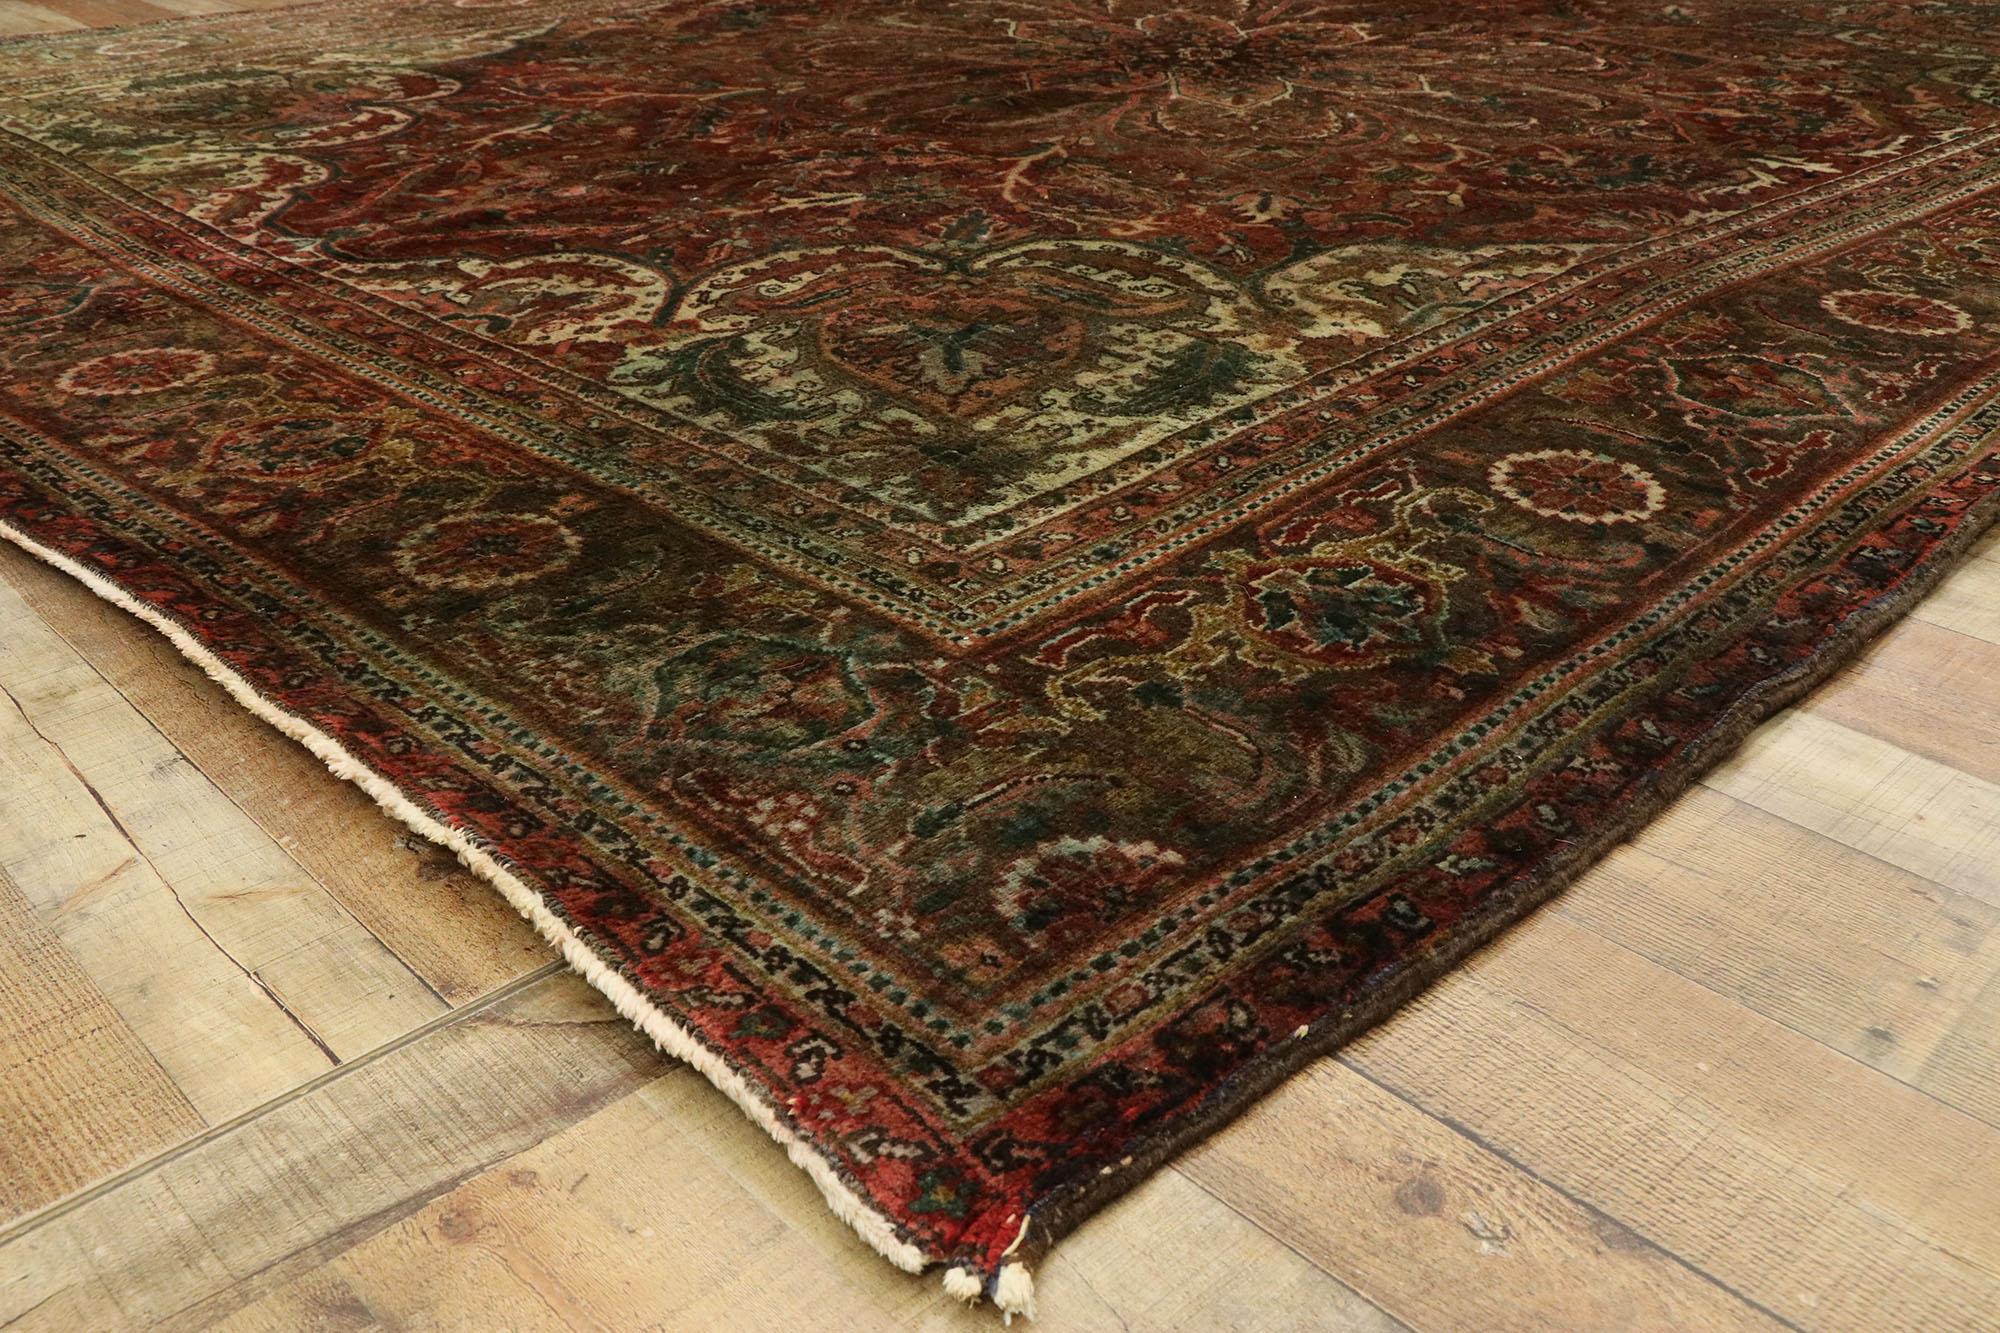 Vintage Persian Ahar Heriz Rug with Modern Rustic Arts & Crafts Style In Good Condition For Sale In Dallas, TX